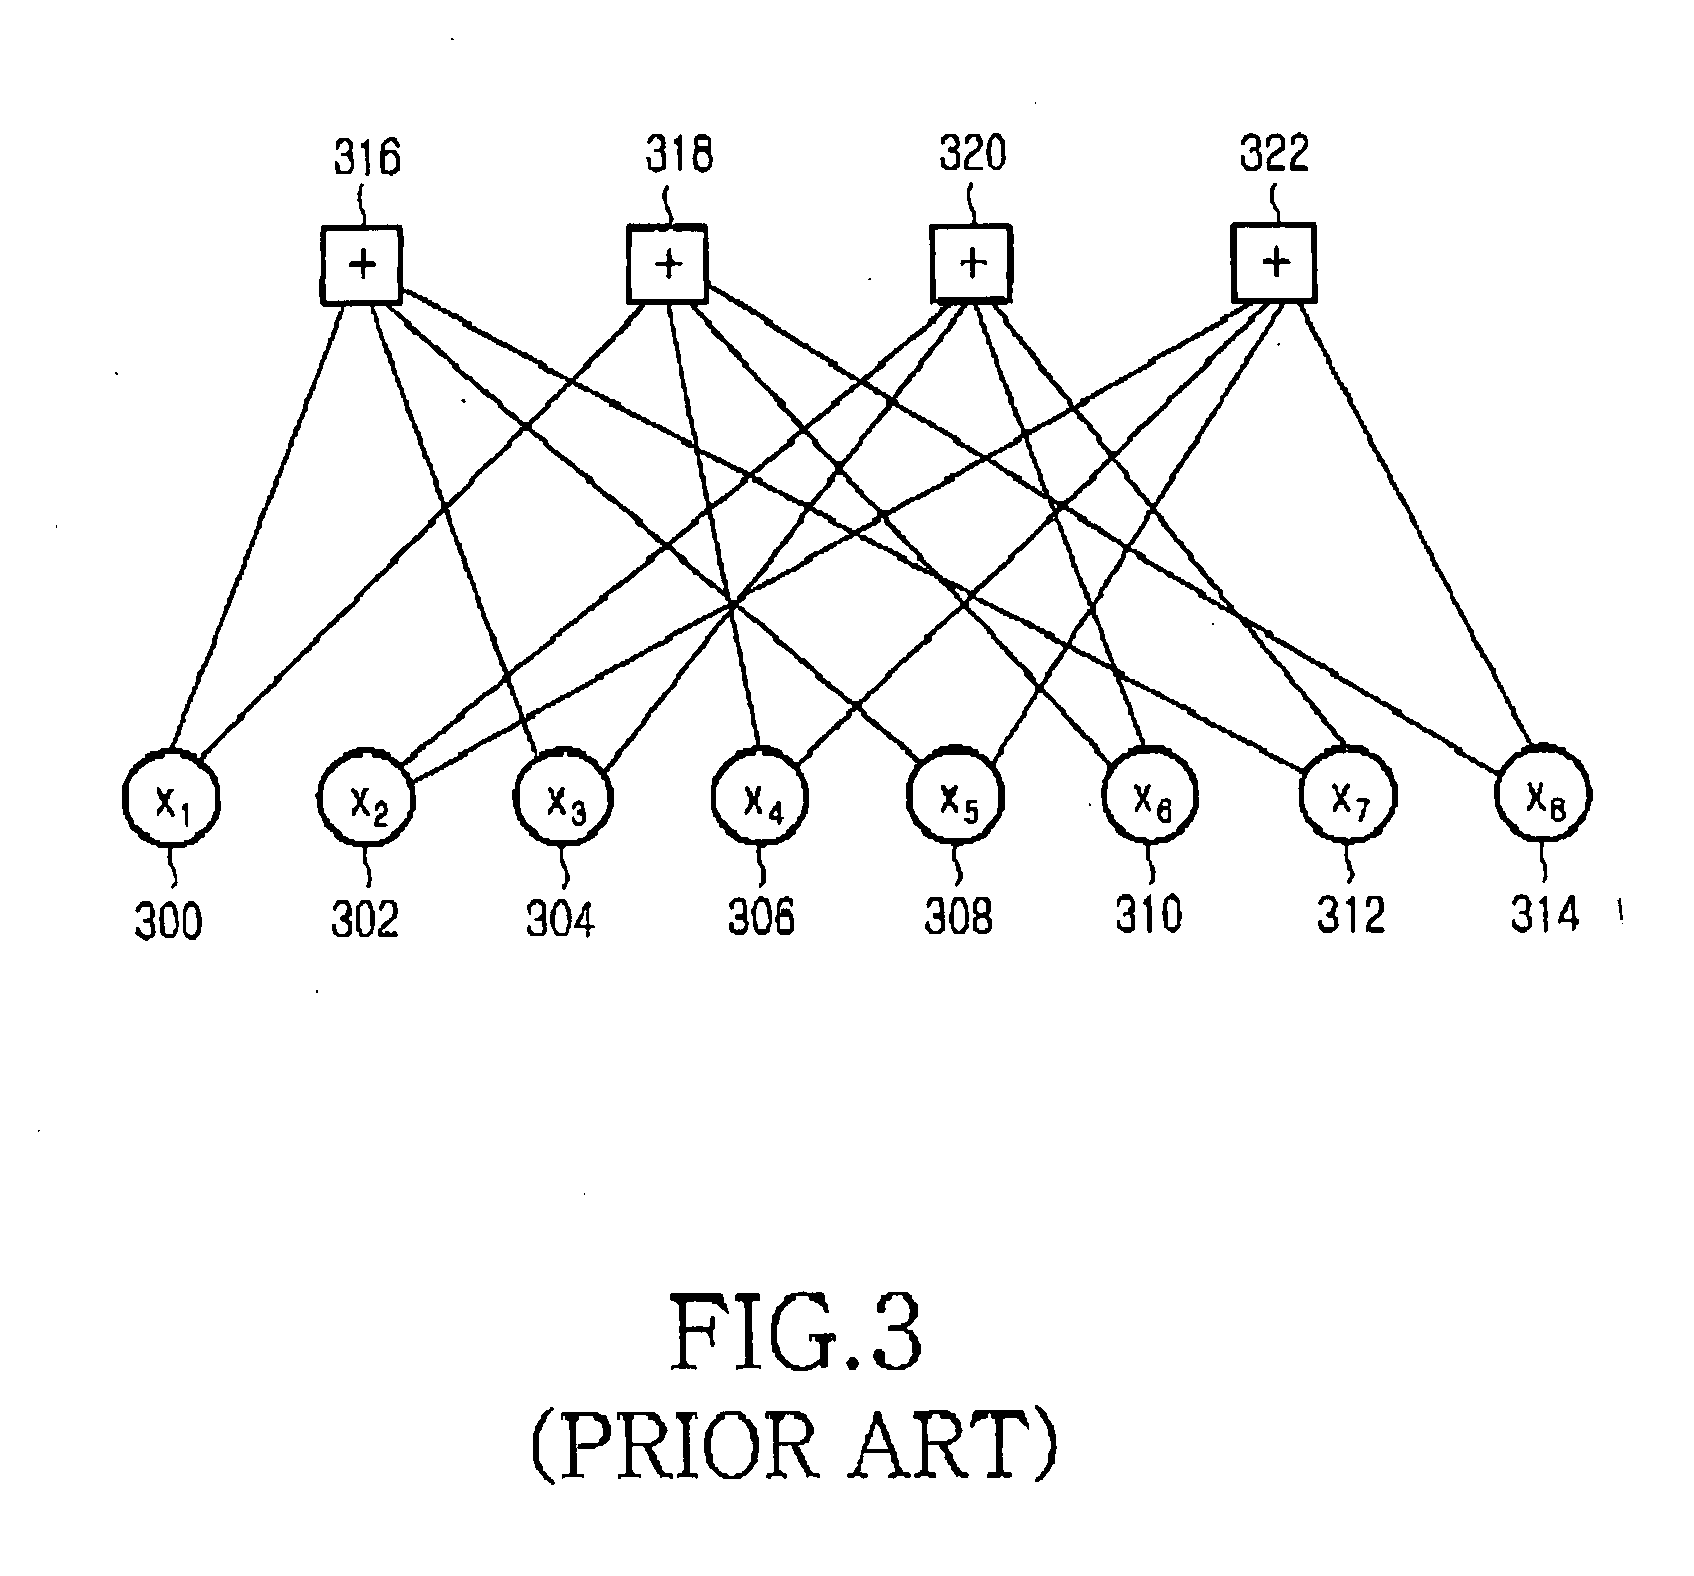 Apparatus and method for coding and decoding irregular repeat accumulate codes